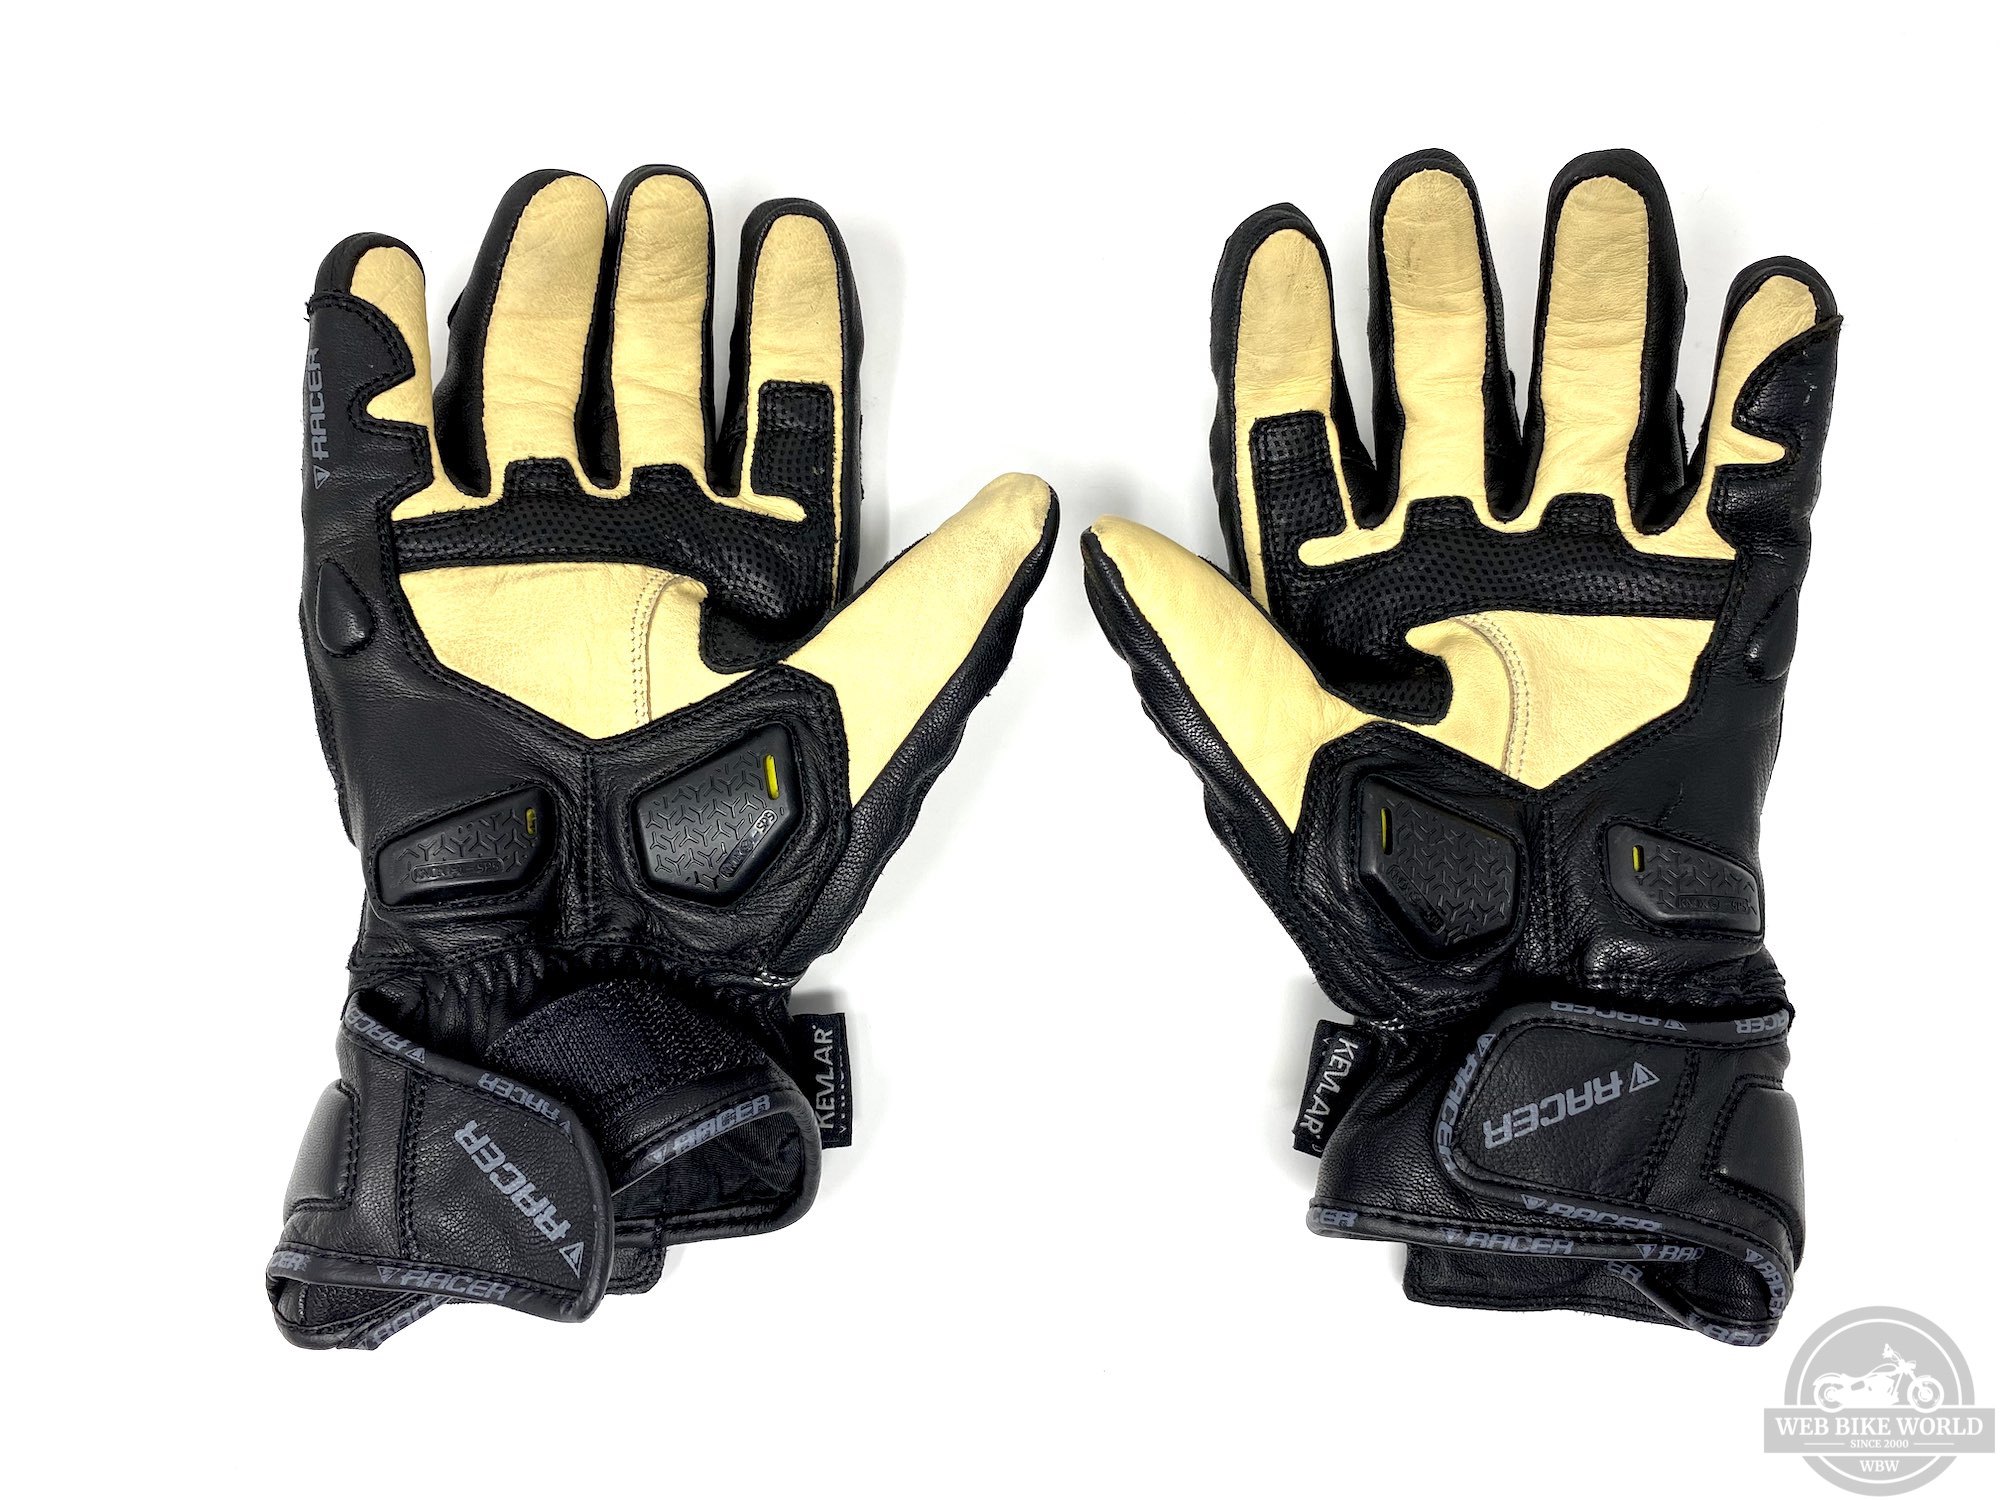 Palm view of the gloves showing the kangaroo leather